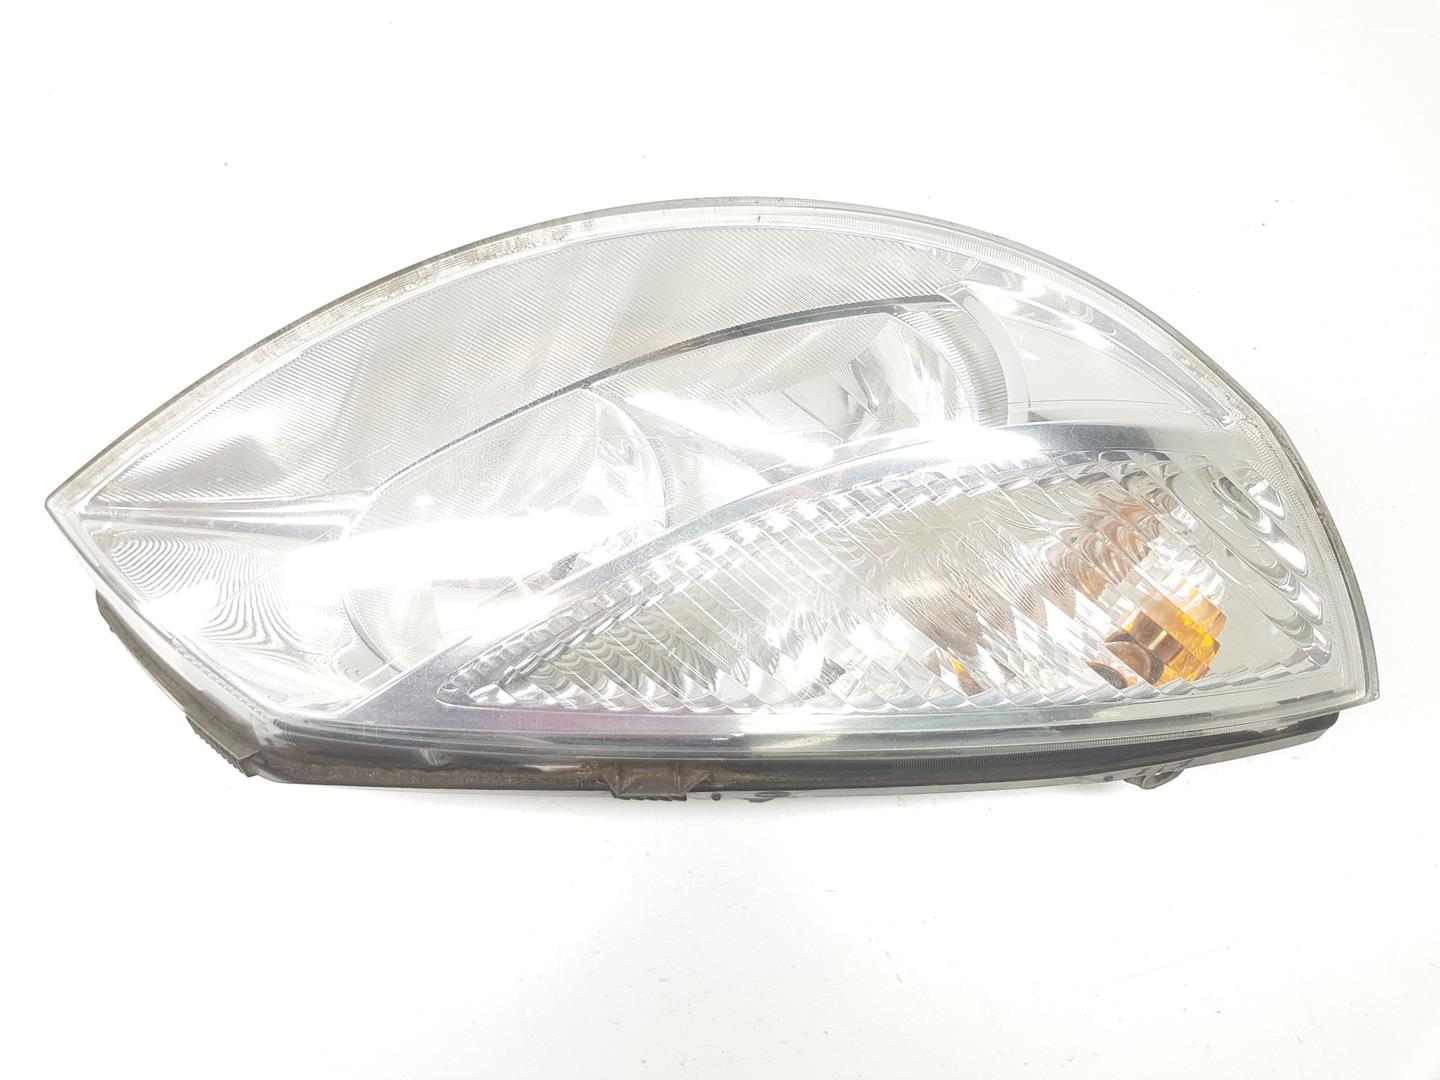 RENAULT Scenic 2 generation (2003-2010) Front Right Headlight 260102336R, 260102336R 24206856